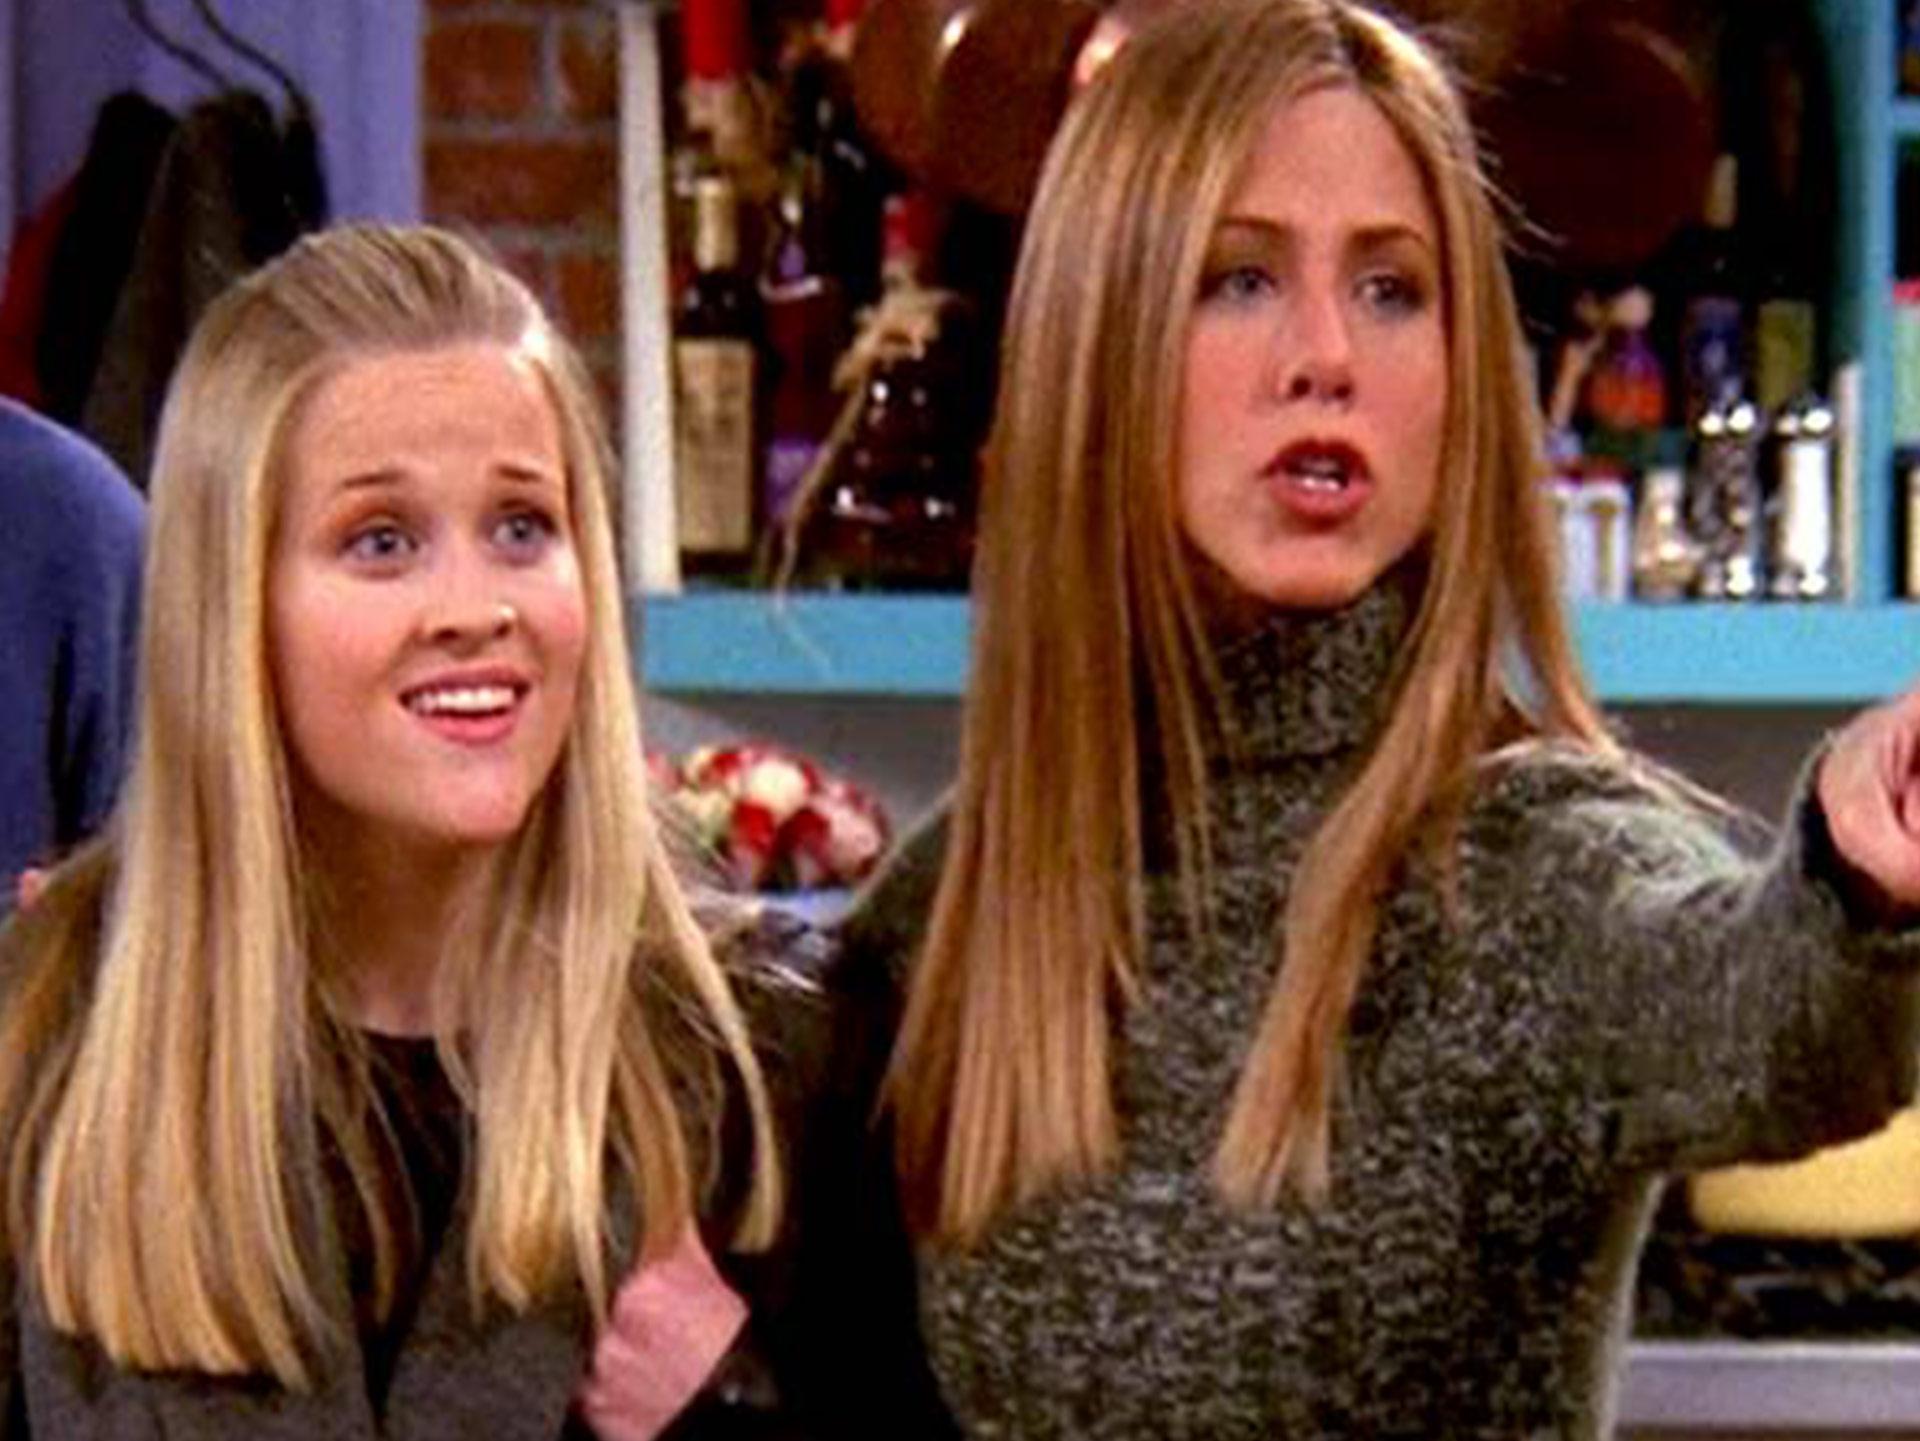 Jennifer Aniston and Reese Witherspoon to star in a new TV show